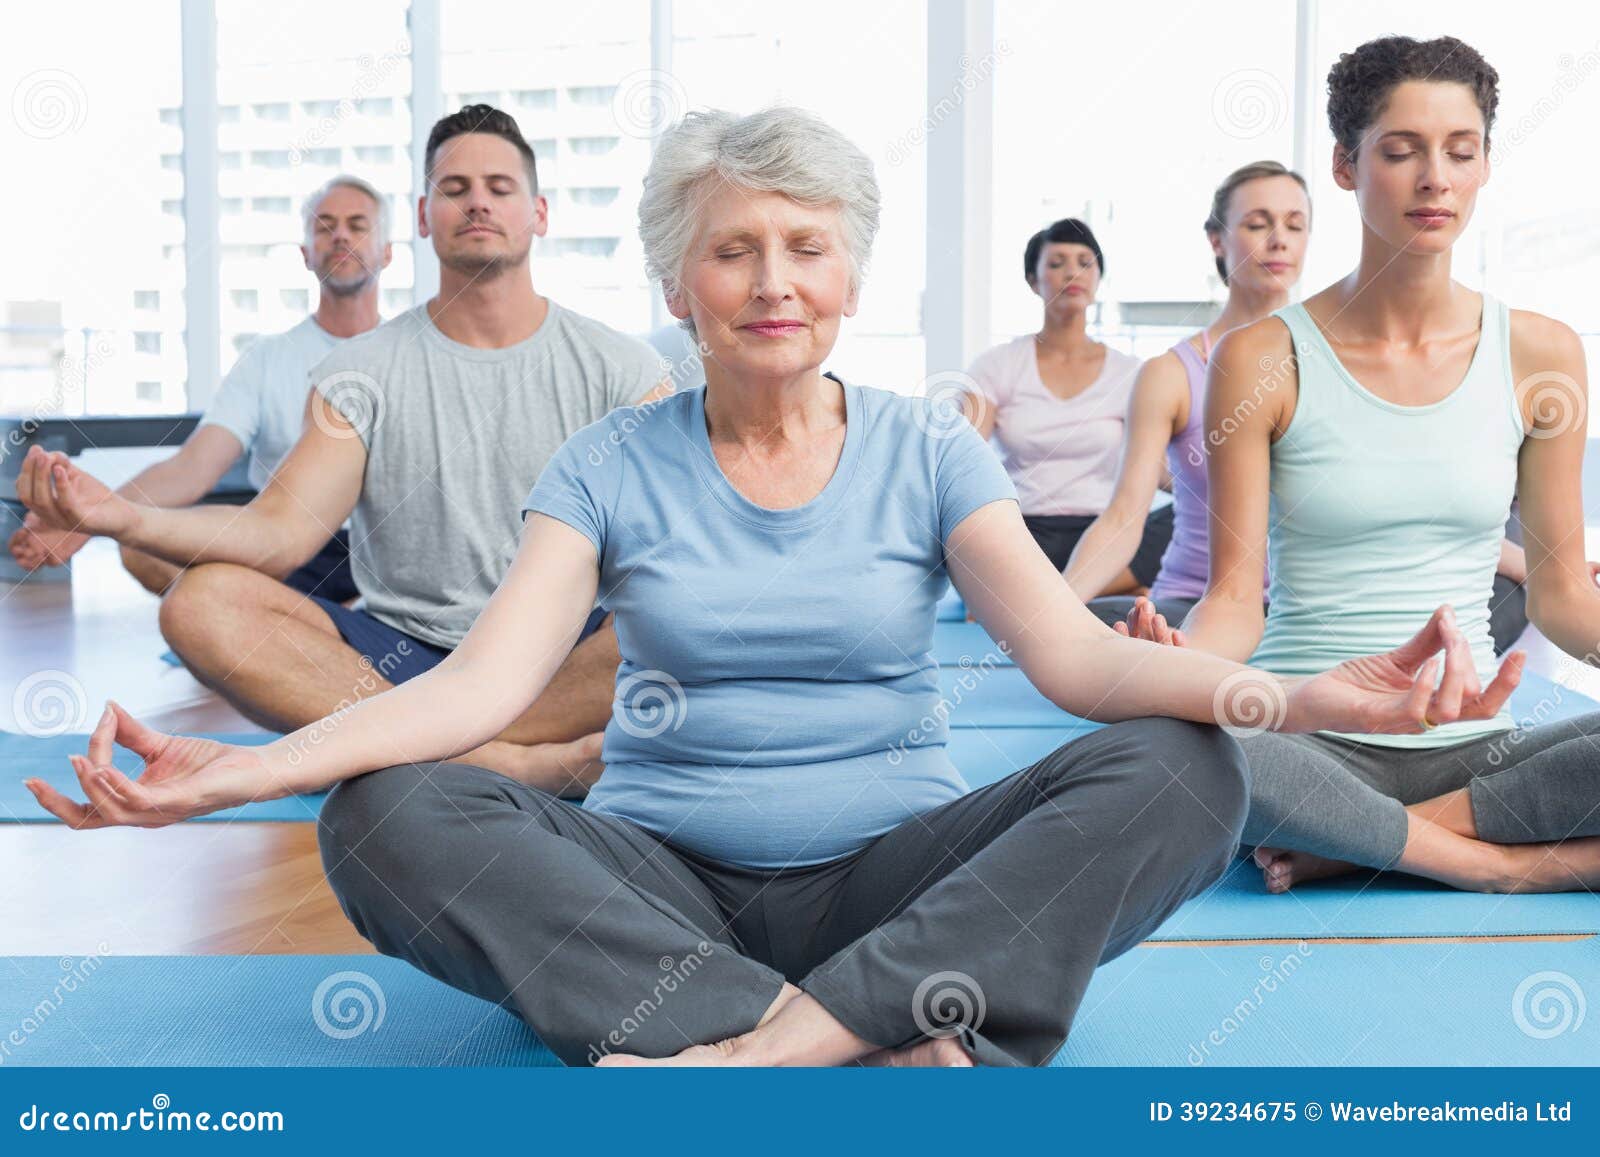 People in Lotus Pose with Eyes Closed at Fitness Studio Stock Image ...